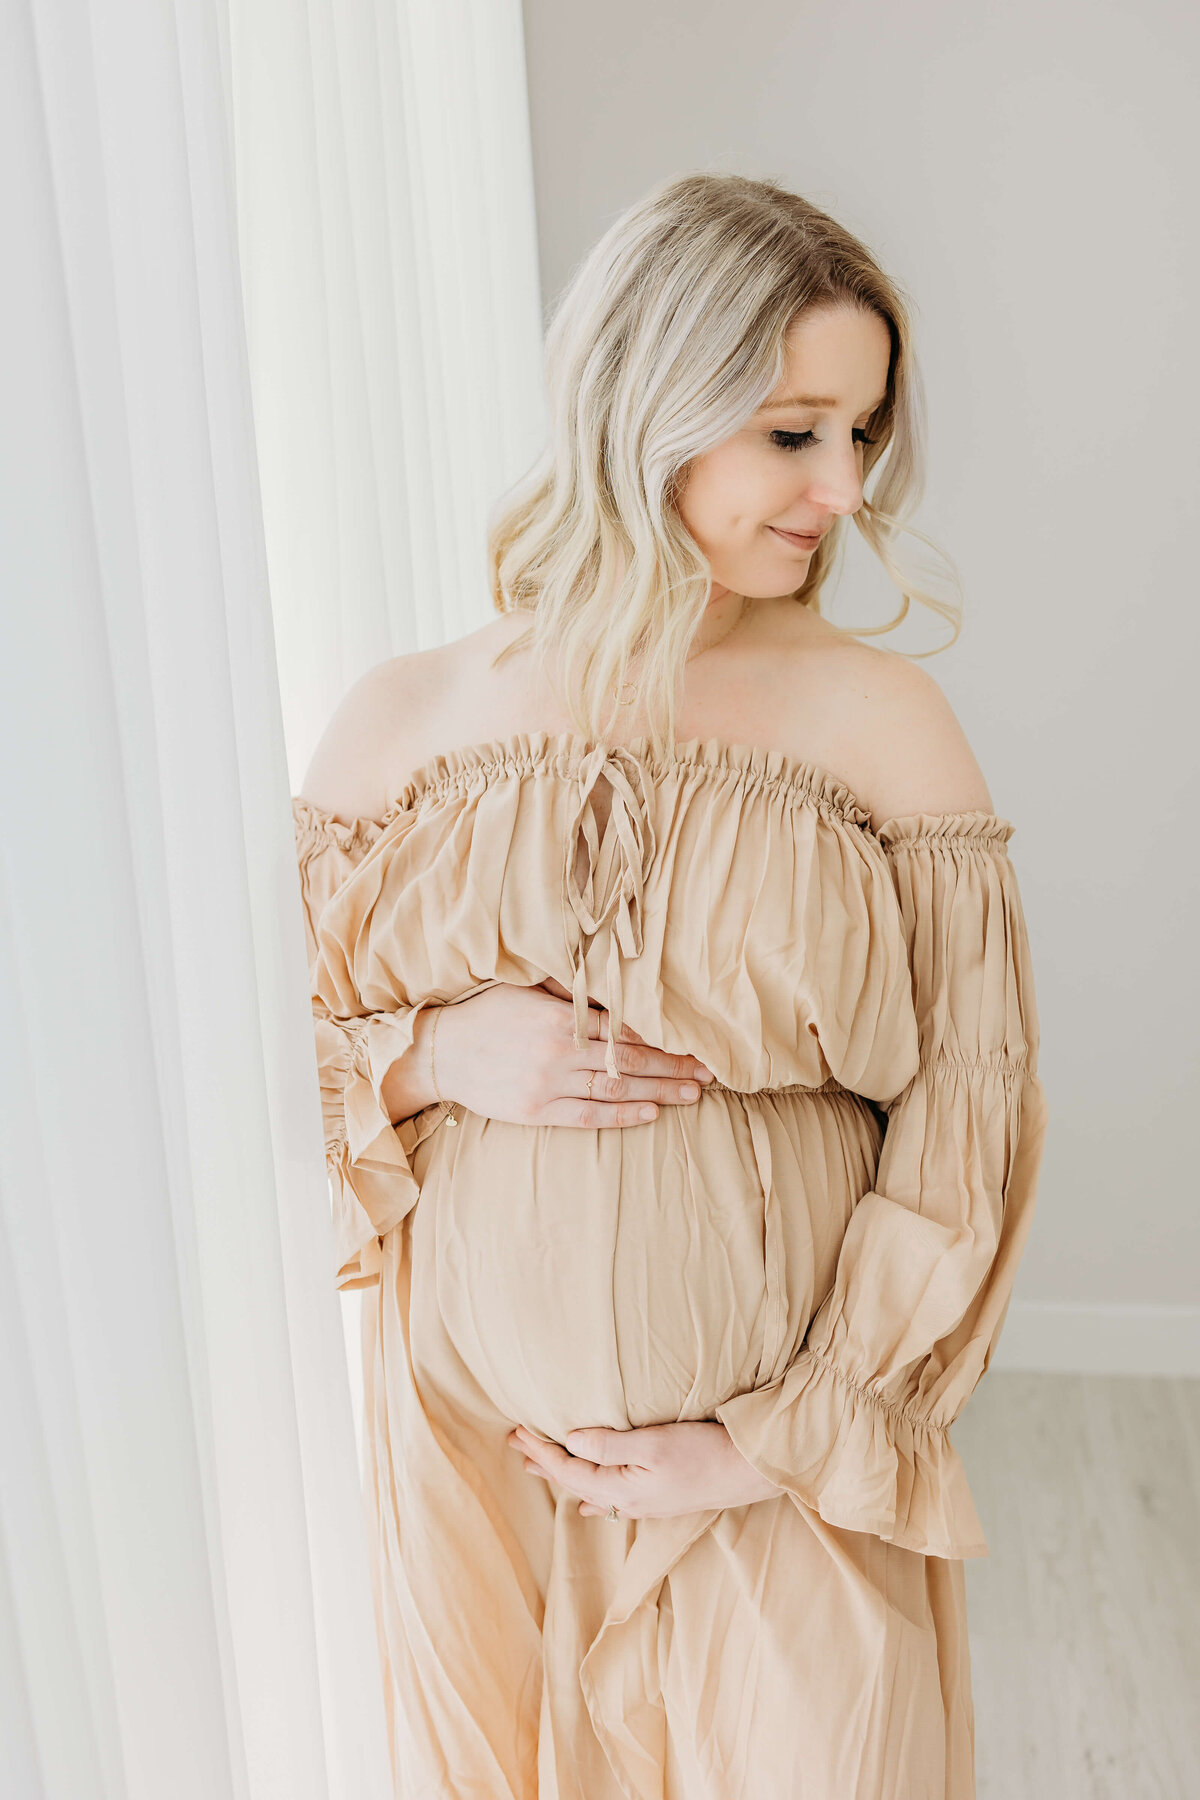 Blonde mom in beige dress holding belly expecting son